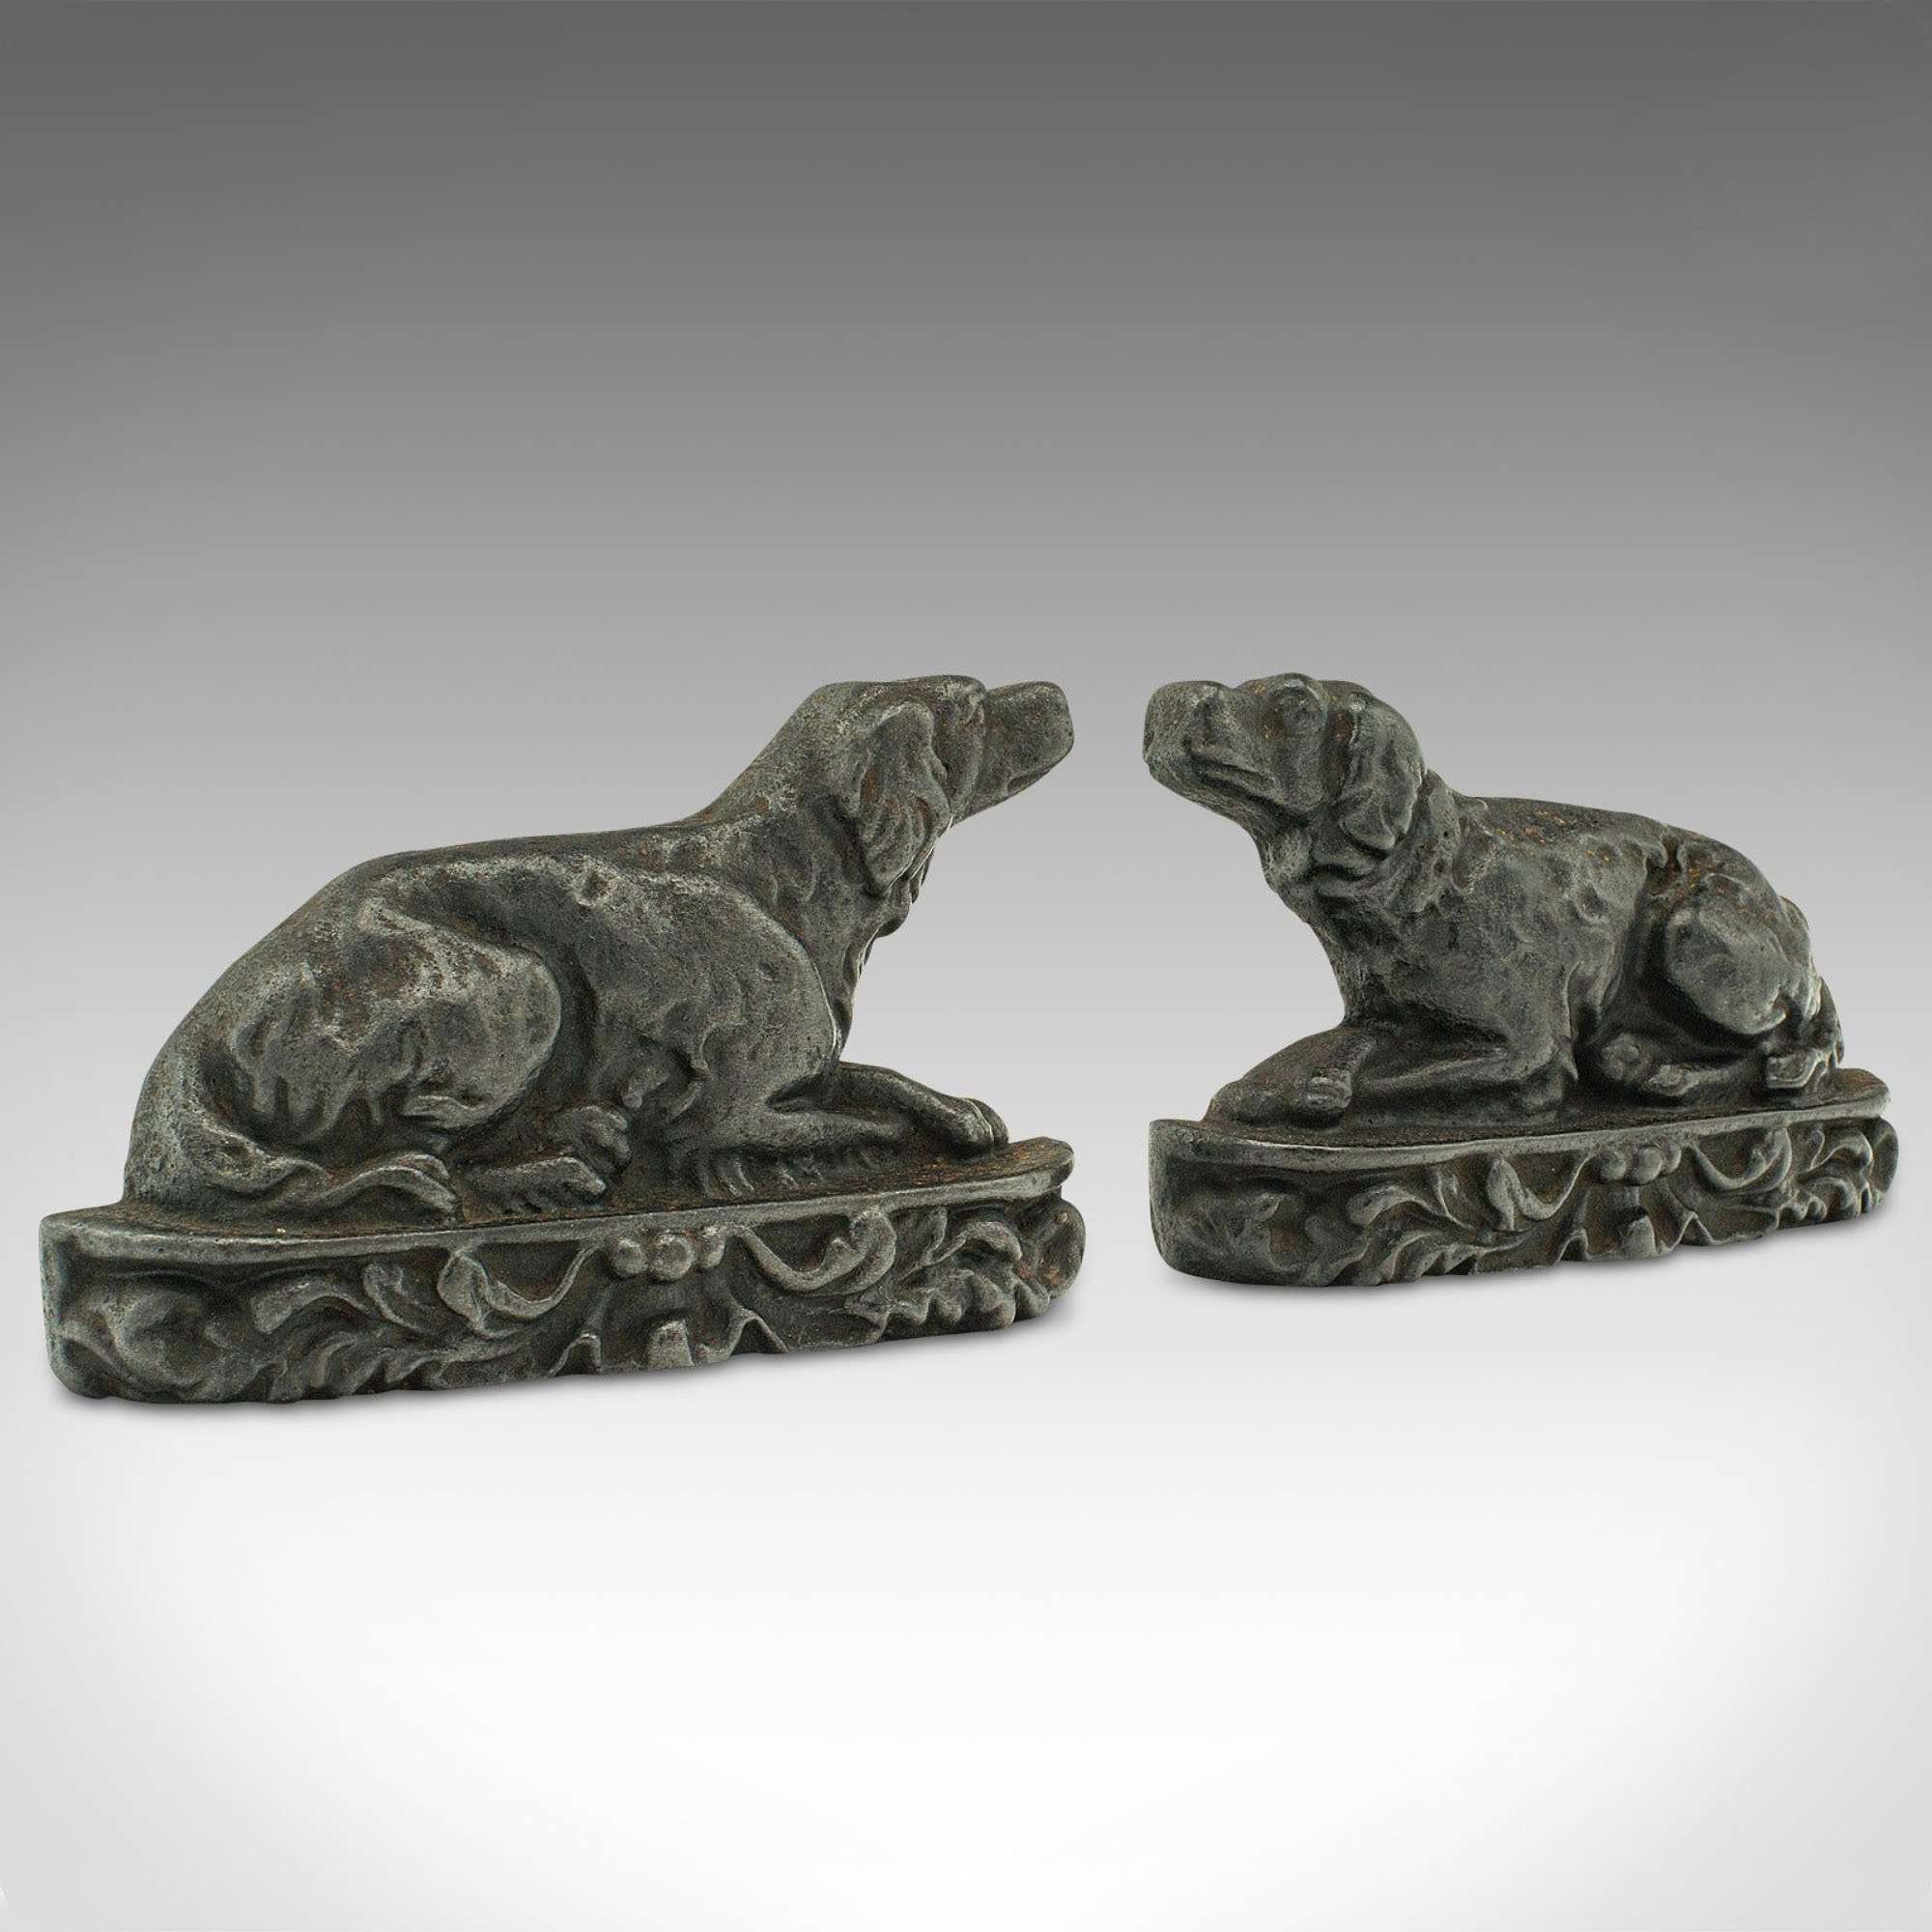 Pair Of Antique Dog Door Stops, English, Iron, Decorative Bookends, Victorian